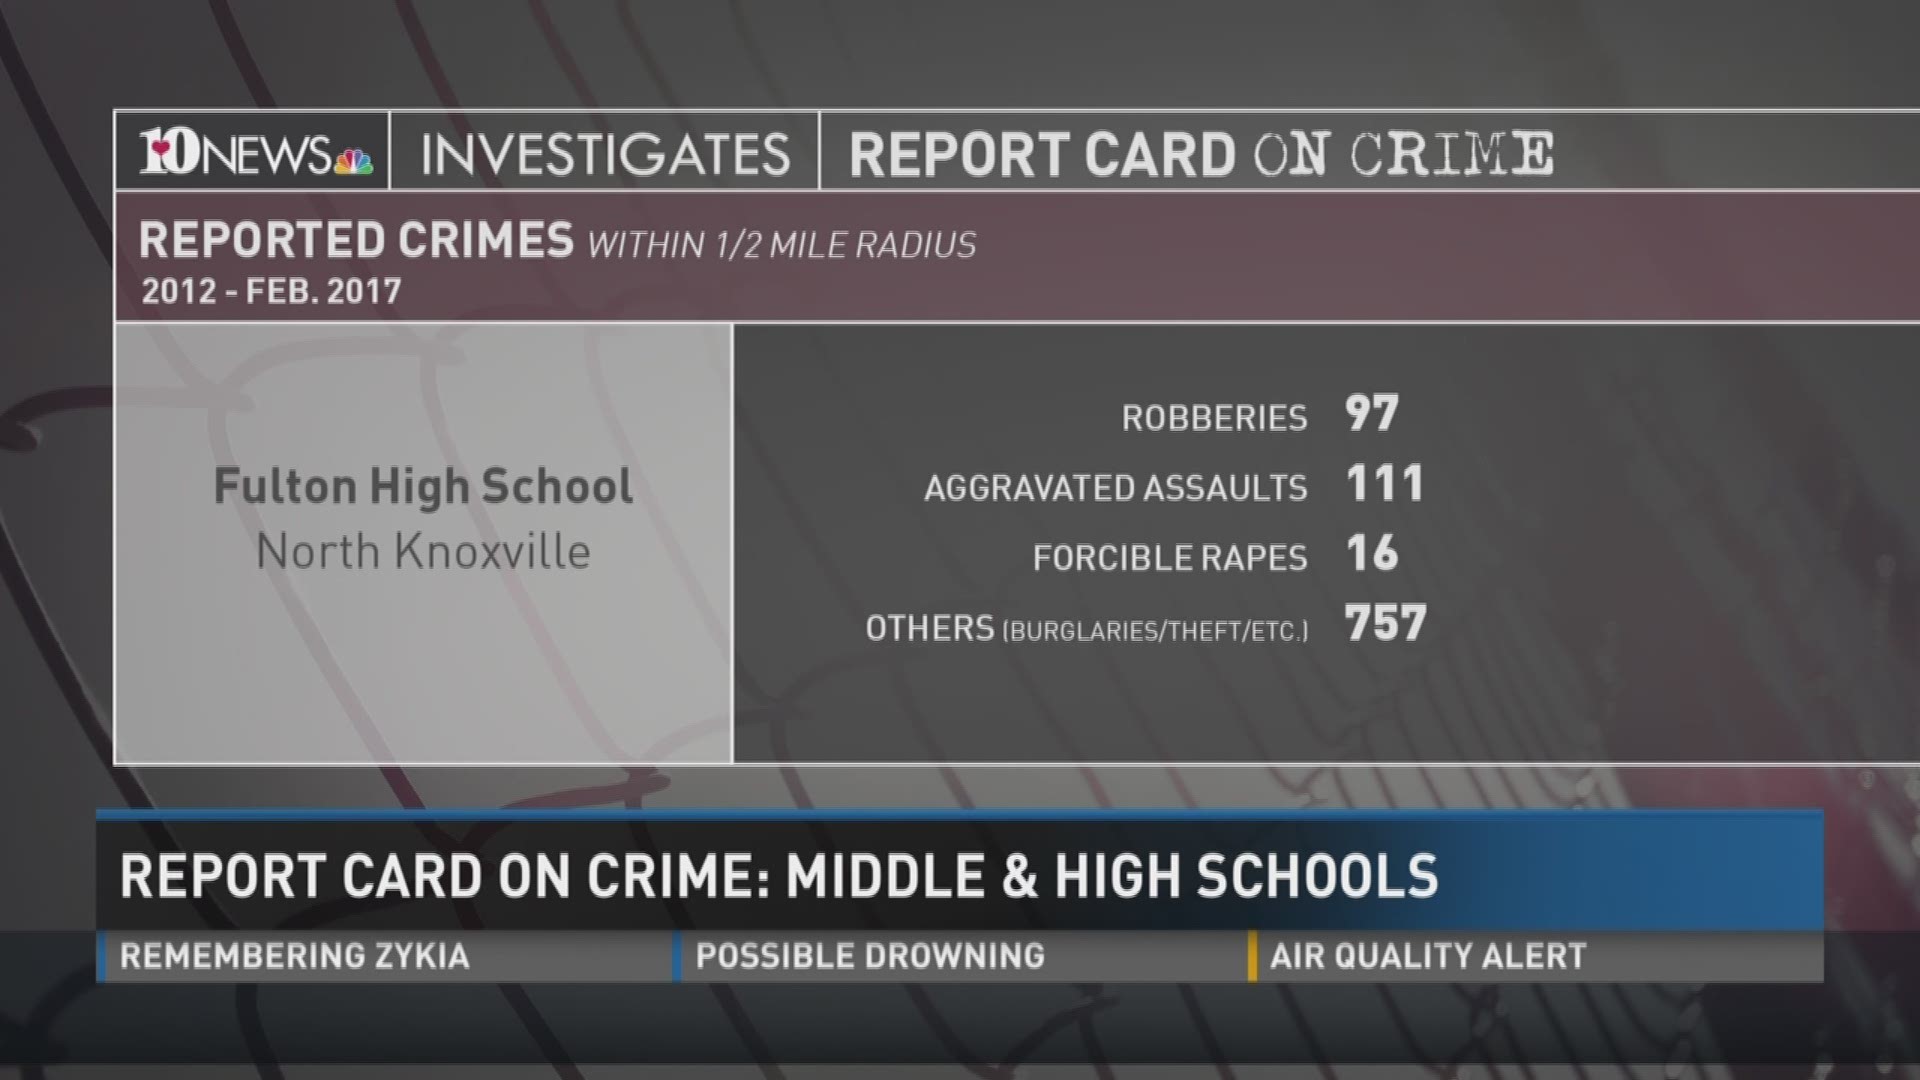 10News looked at serious reported crimes around each Knox County middle and high school -- and asked school, law enforcement and county officials what they're doing to keep kids safe.